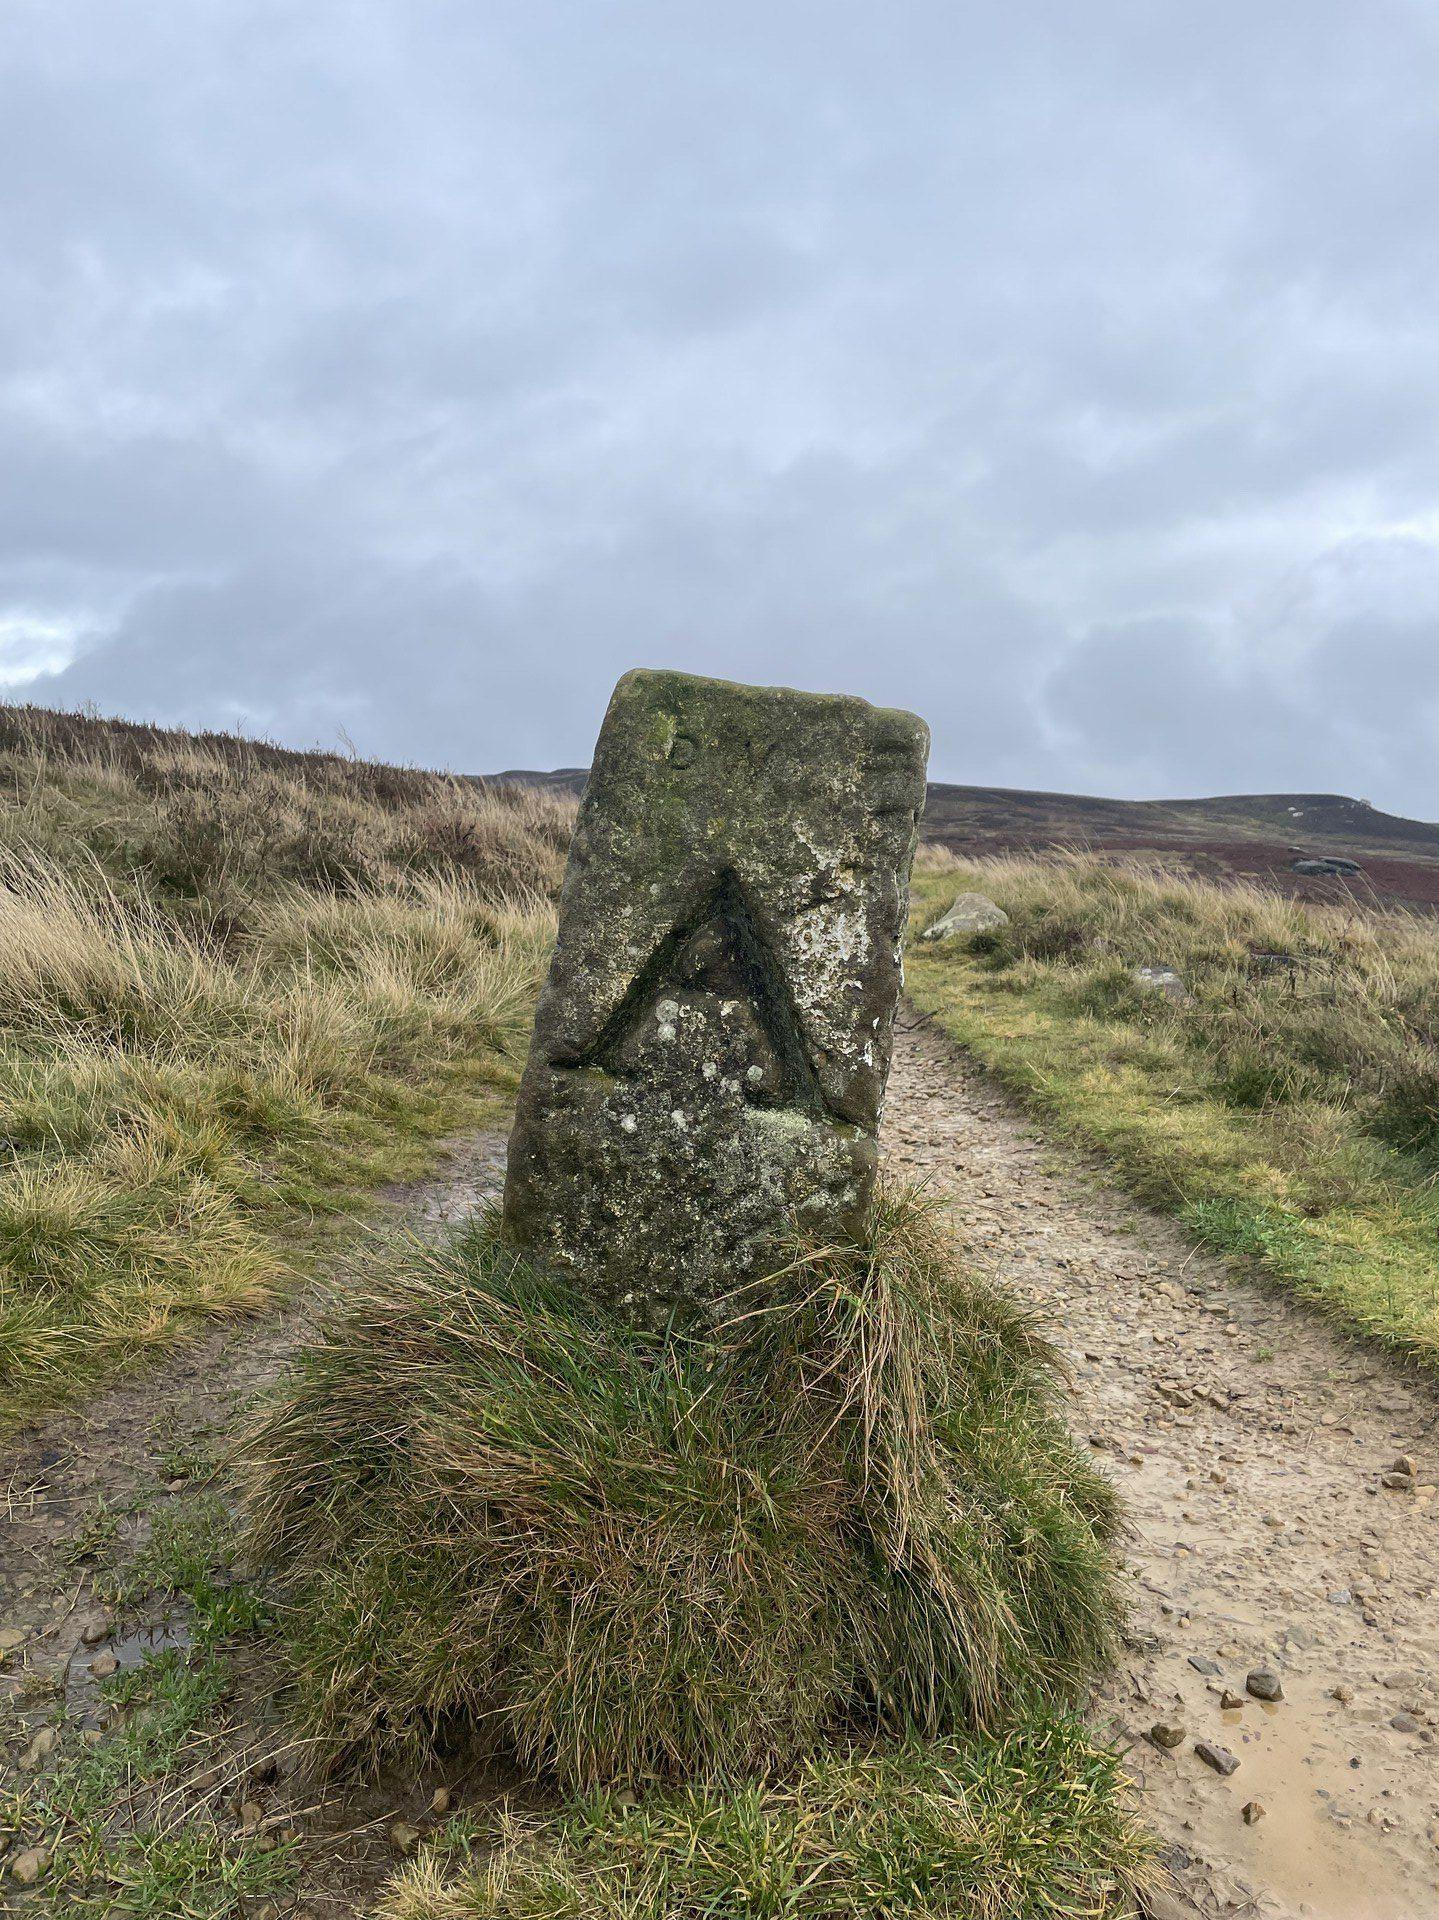 An old boundary stone with the letter A carved into it, plumb in the middle of the path.